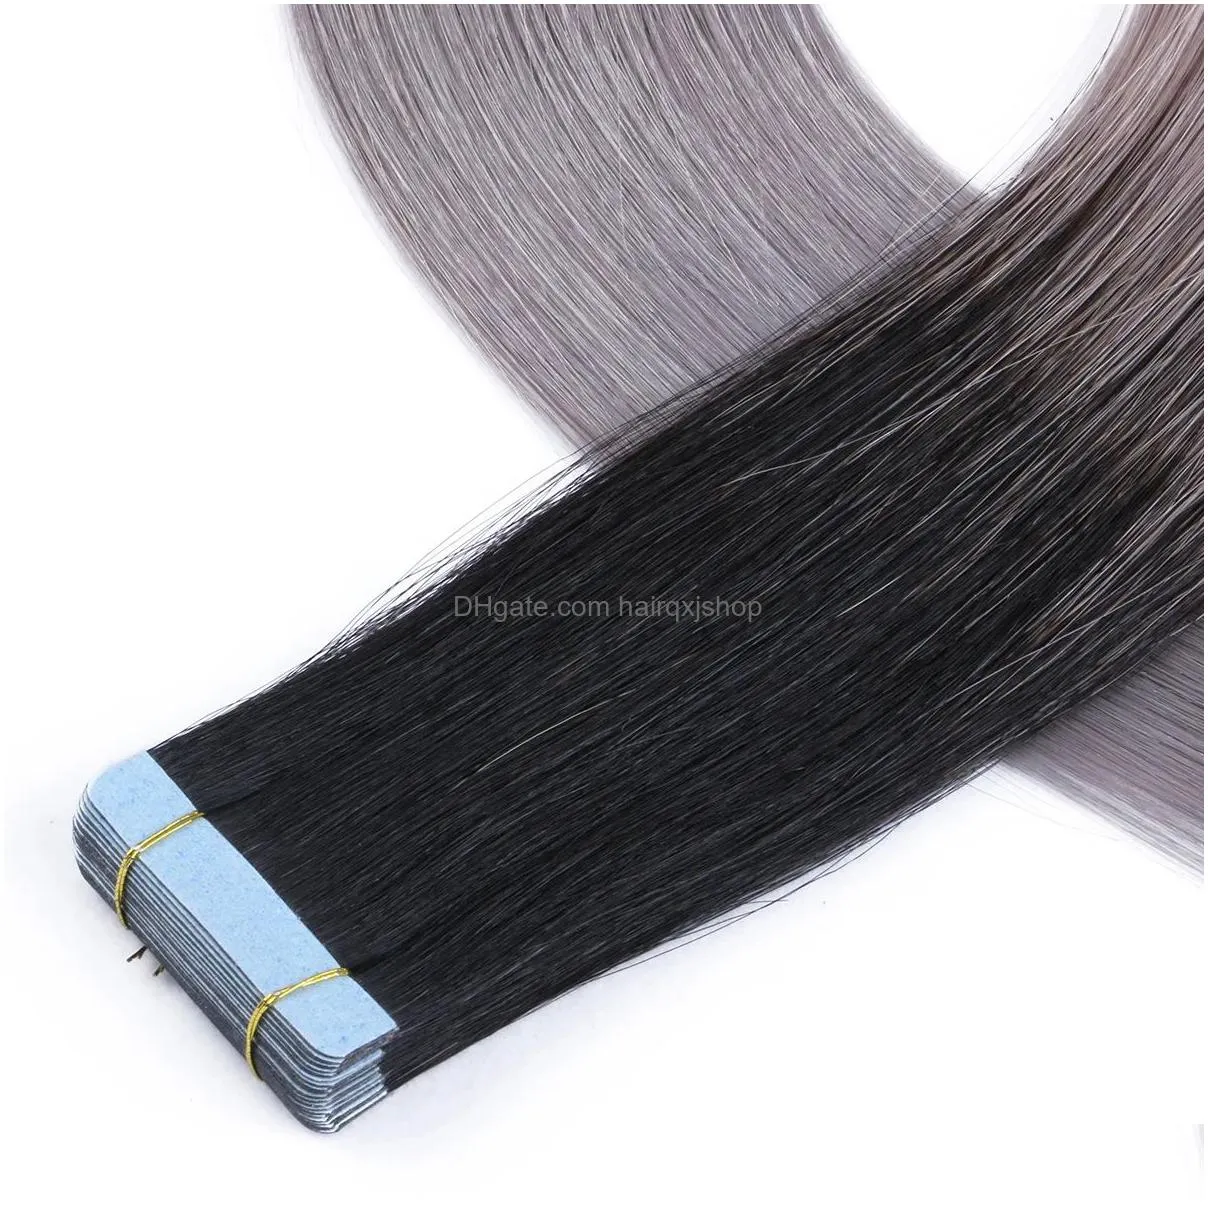 Hair Extension Kits Extensions Ombre Ash Blonde Natural Tape In Humanhair Skin Weft Adhesive Invisible Real Straight For Drop Deliver Dhhpw